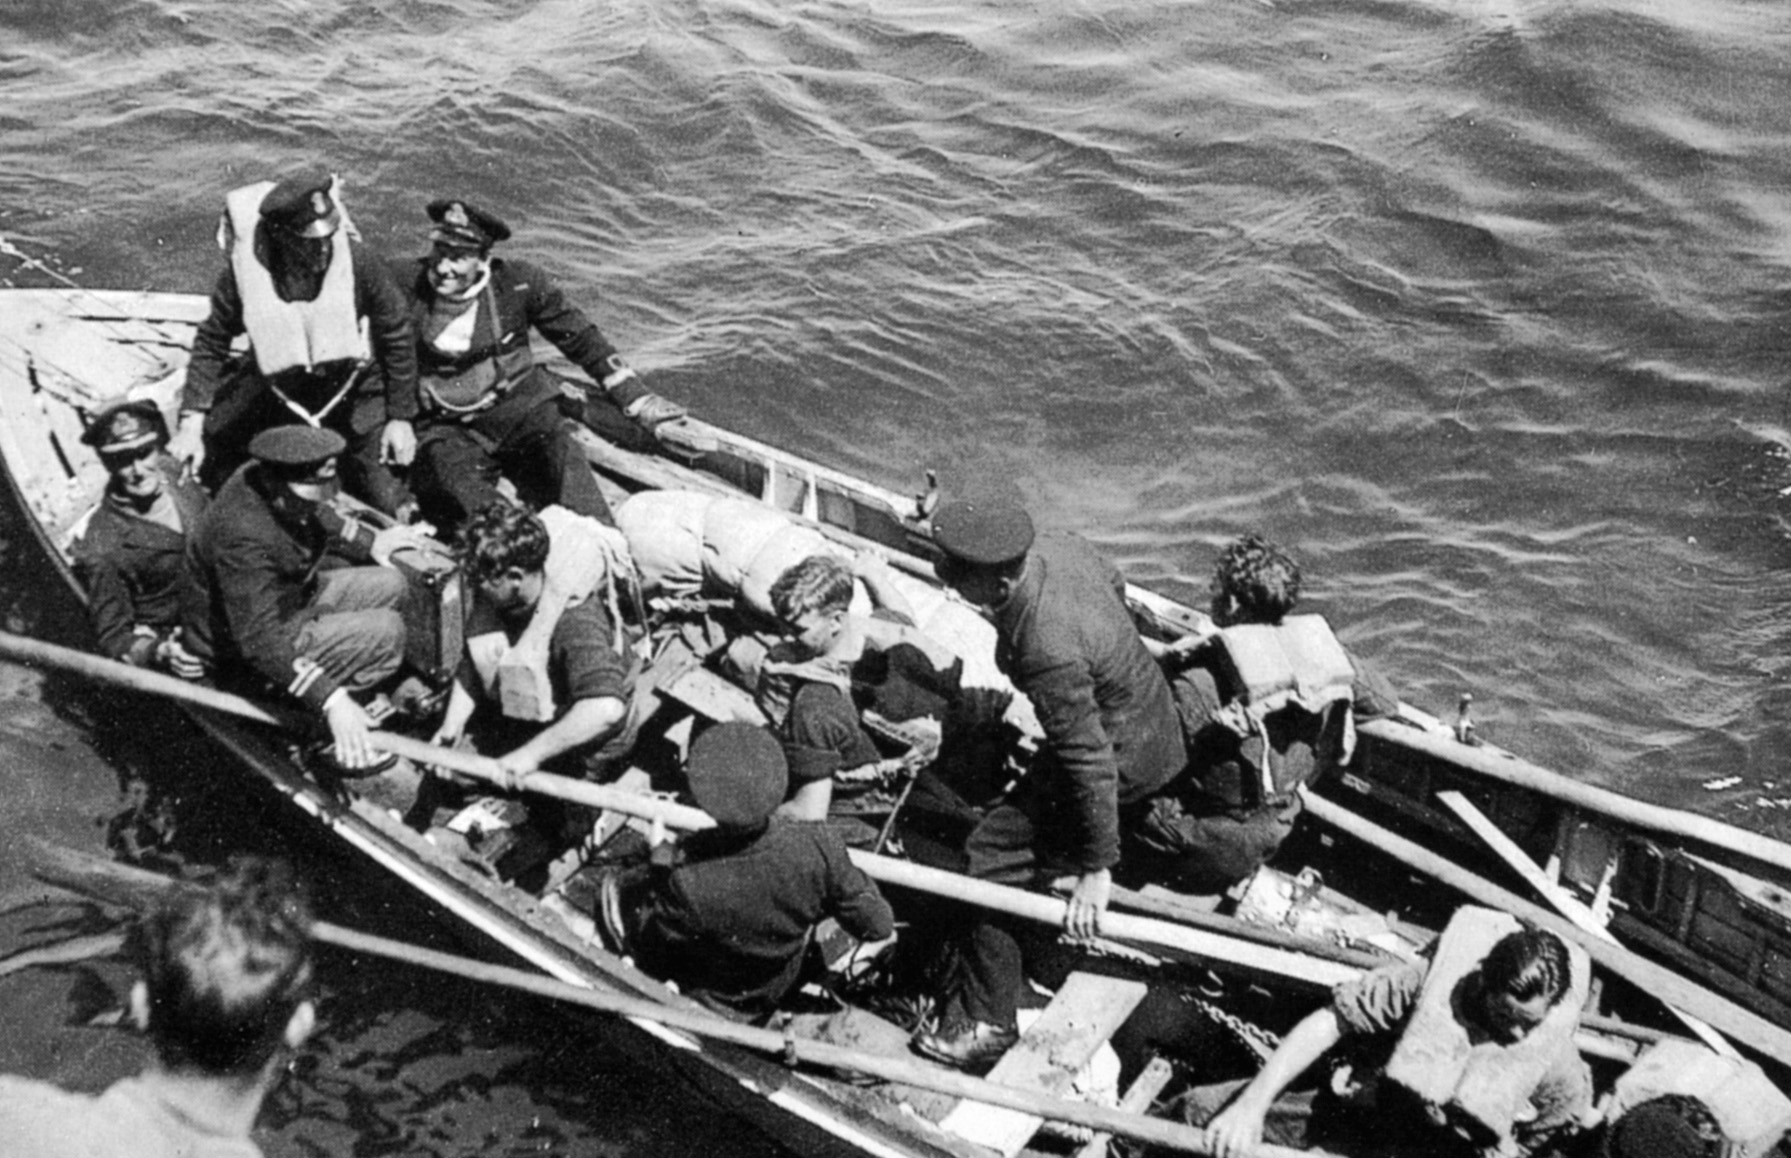 Walker and several of his key men arrive at HMS Wild Goose shortly after ramming U-119 aboard the HMS Starling.